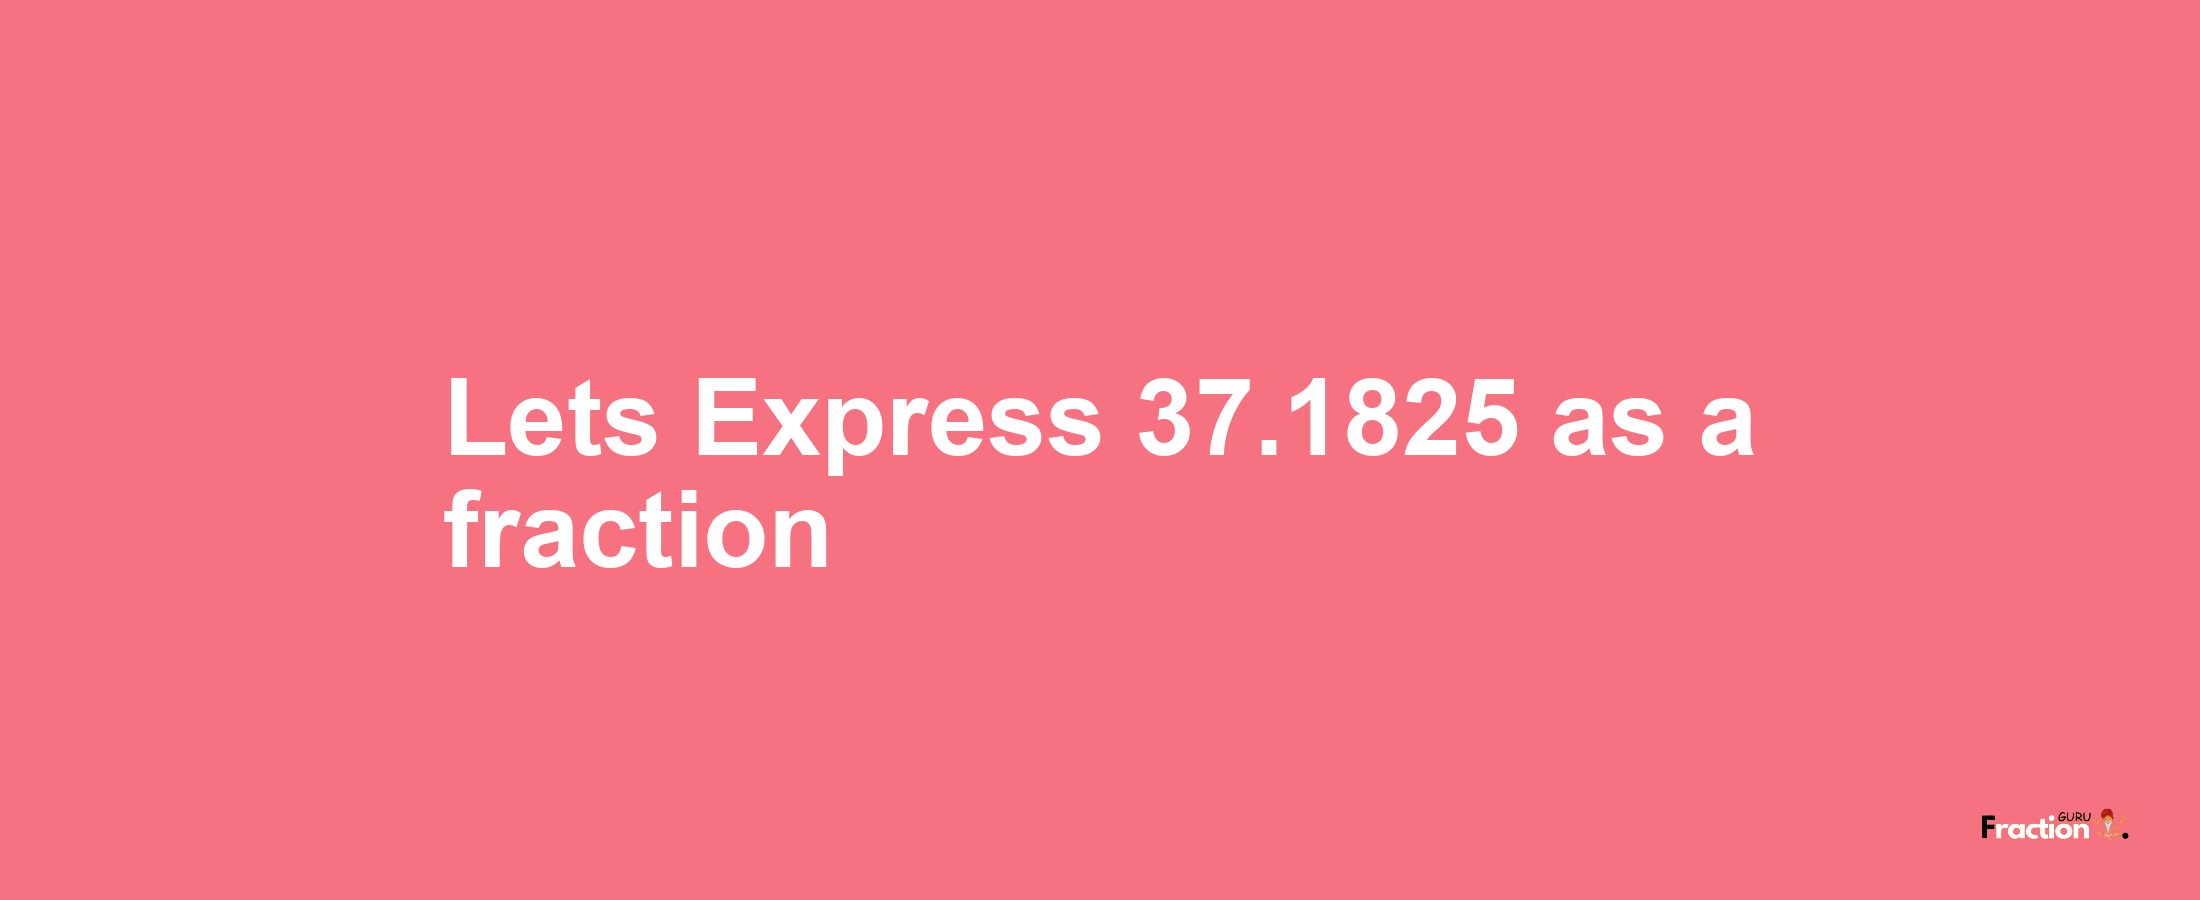 Lets Express 37.1825 as afraction